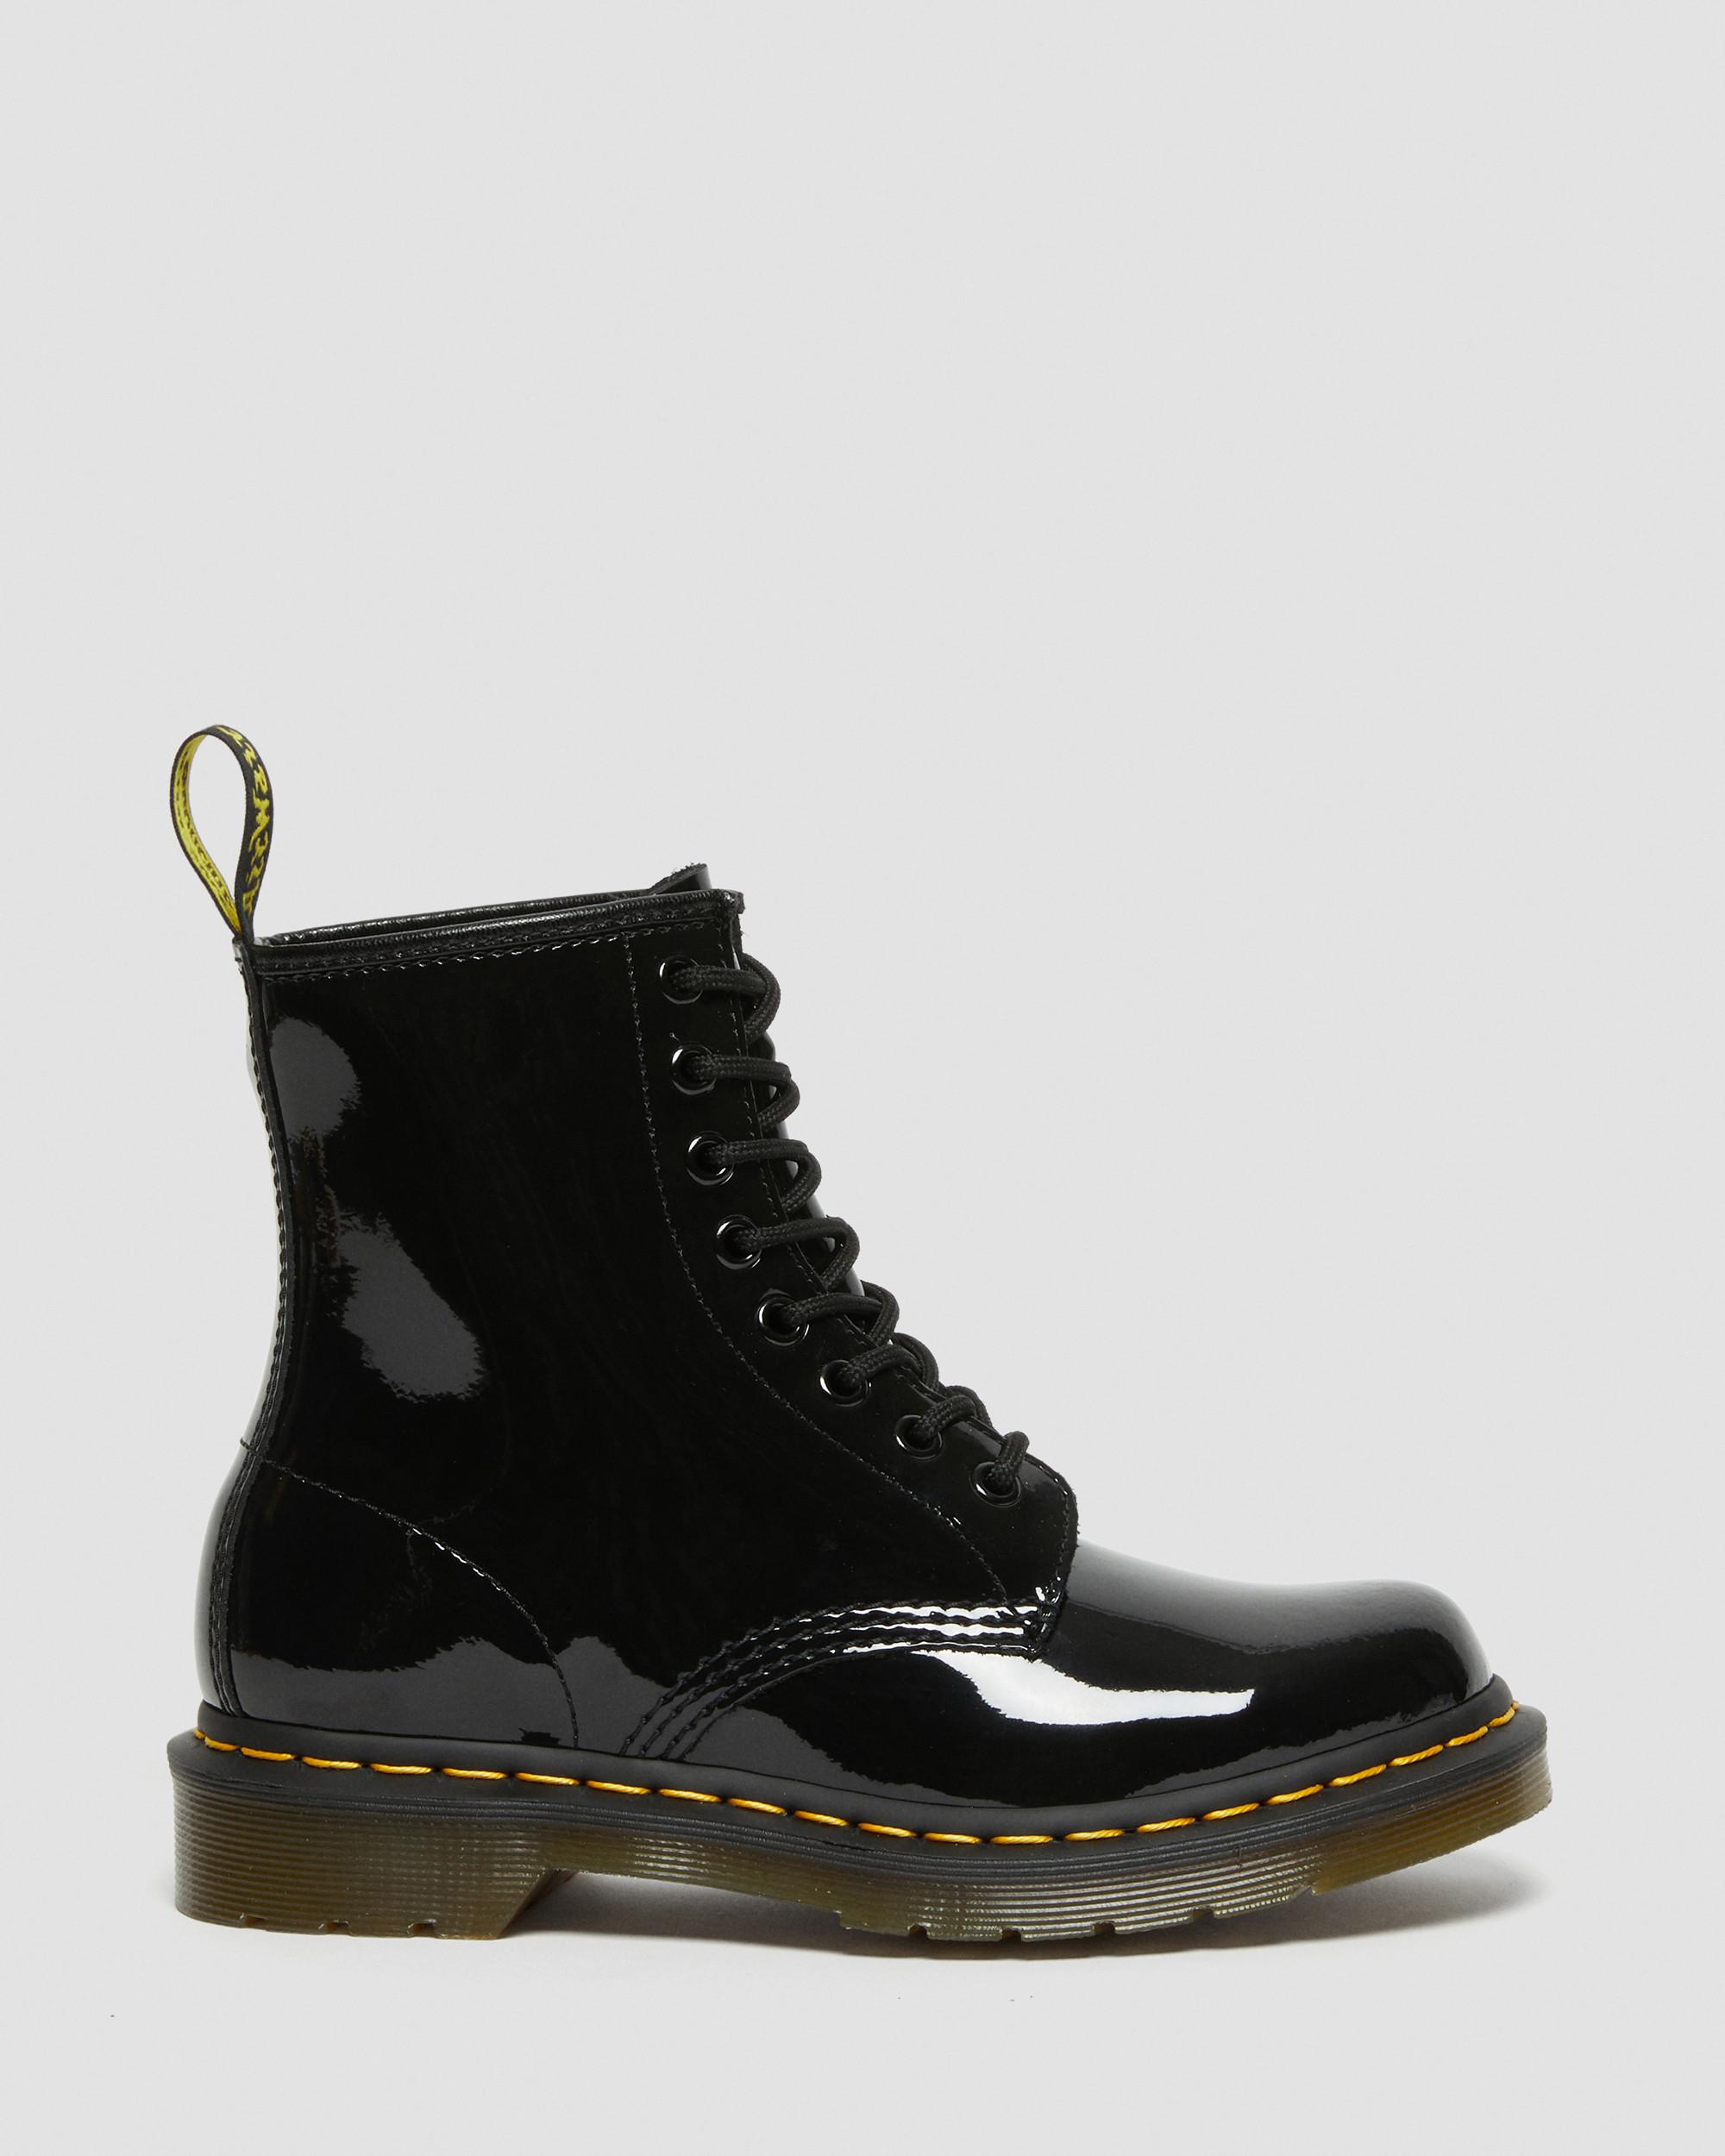 PATENT LEATHER LACE UP BOOTS | Dr. Martens